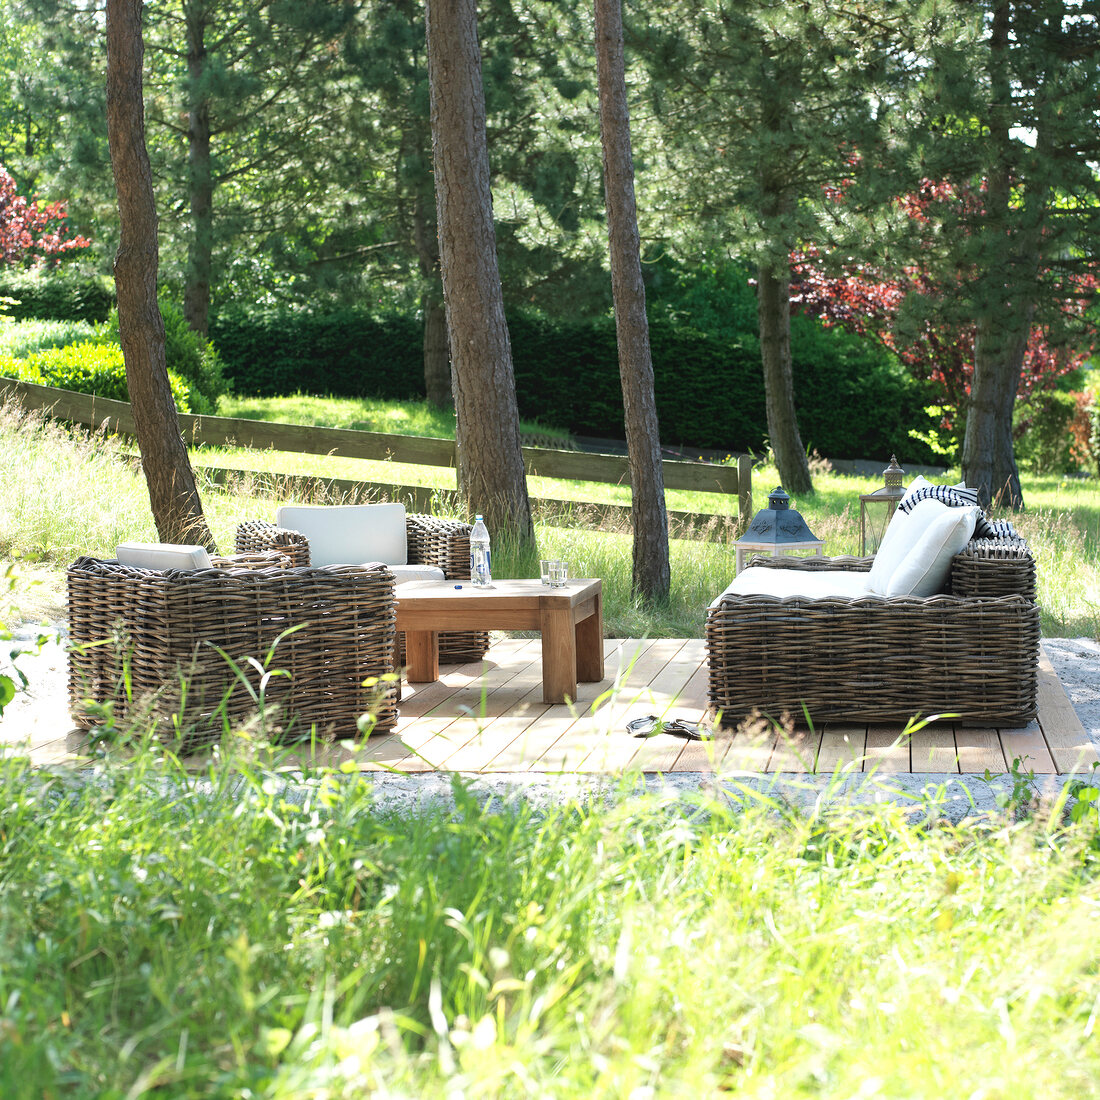 View of garden with wooden chair, cushions and table